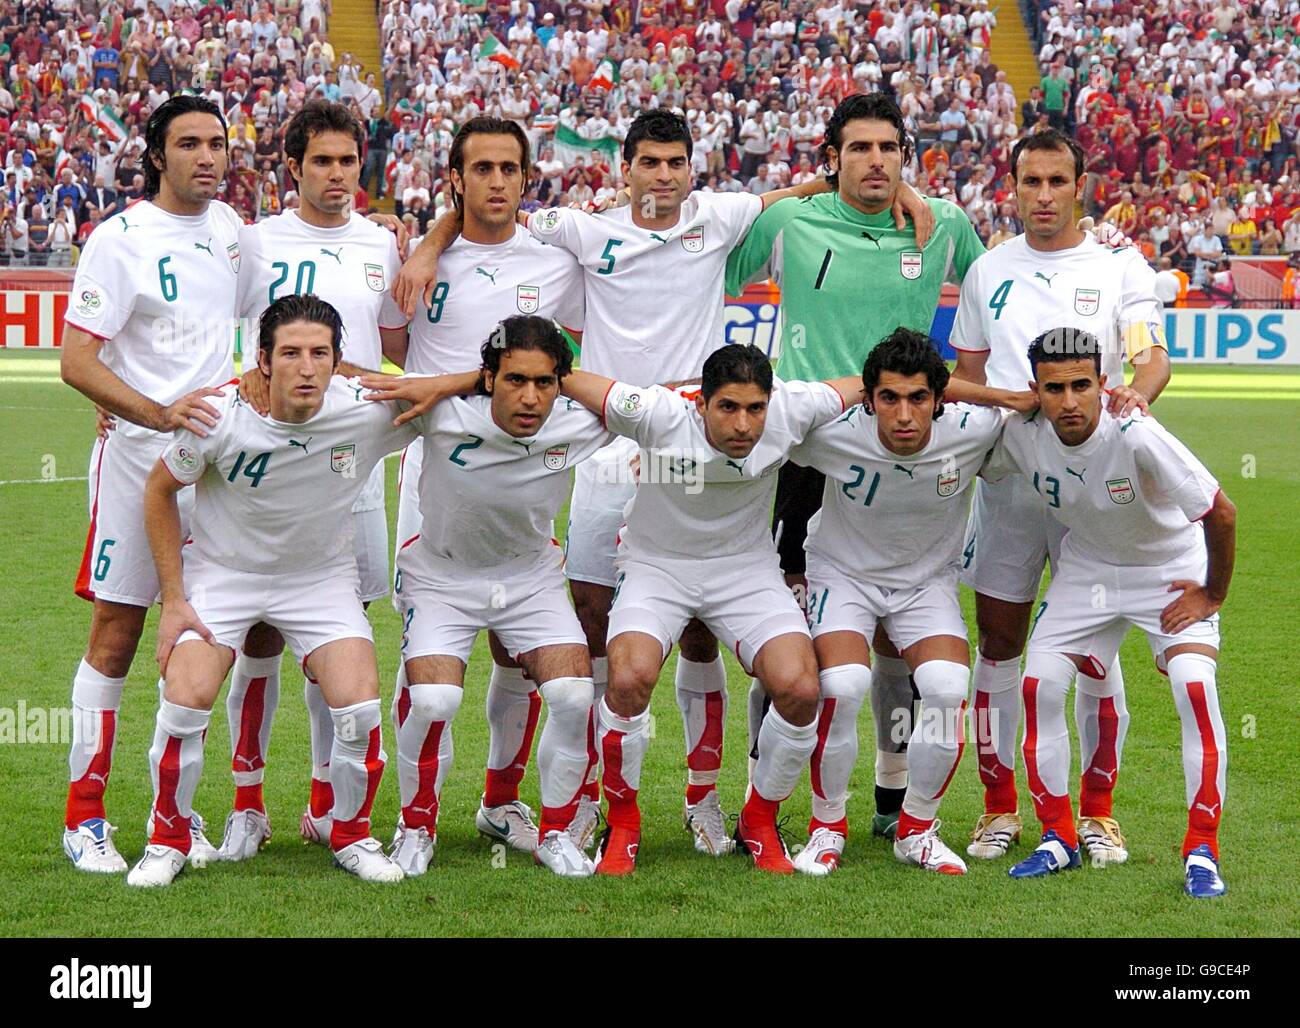 Soccer - 2006 FIFA World Cup Germany - Group D - Portugal v Iran - Commerzbank Arena. Iran team group Stock Photo